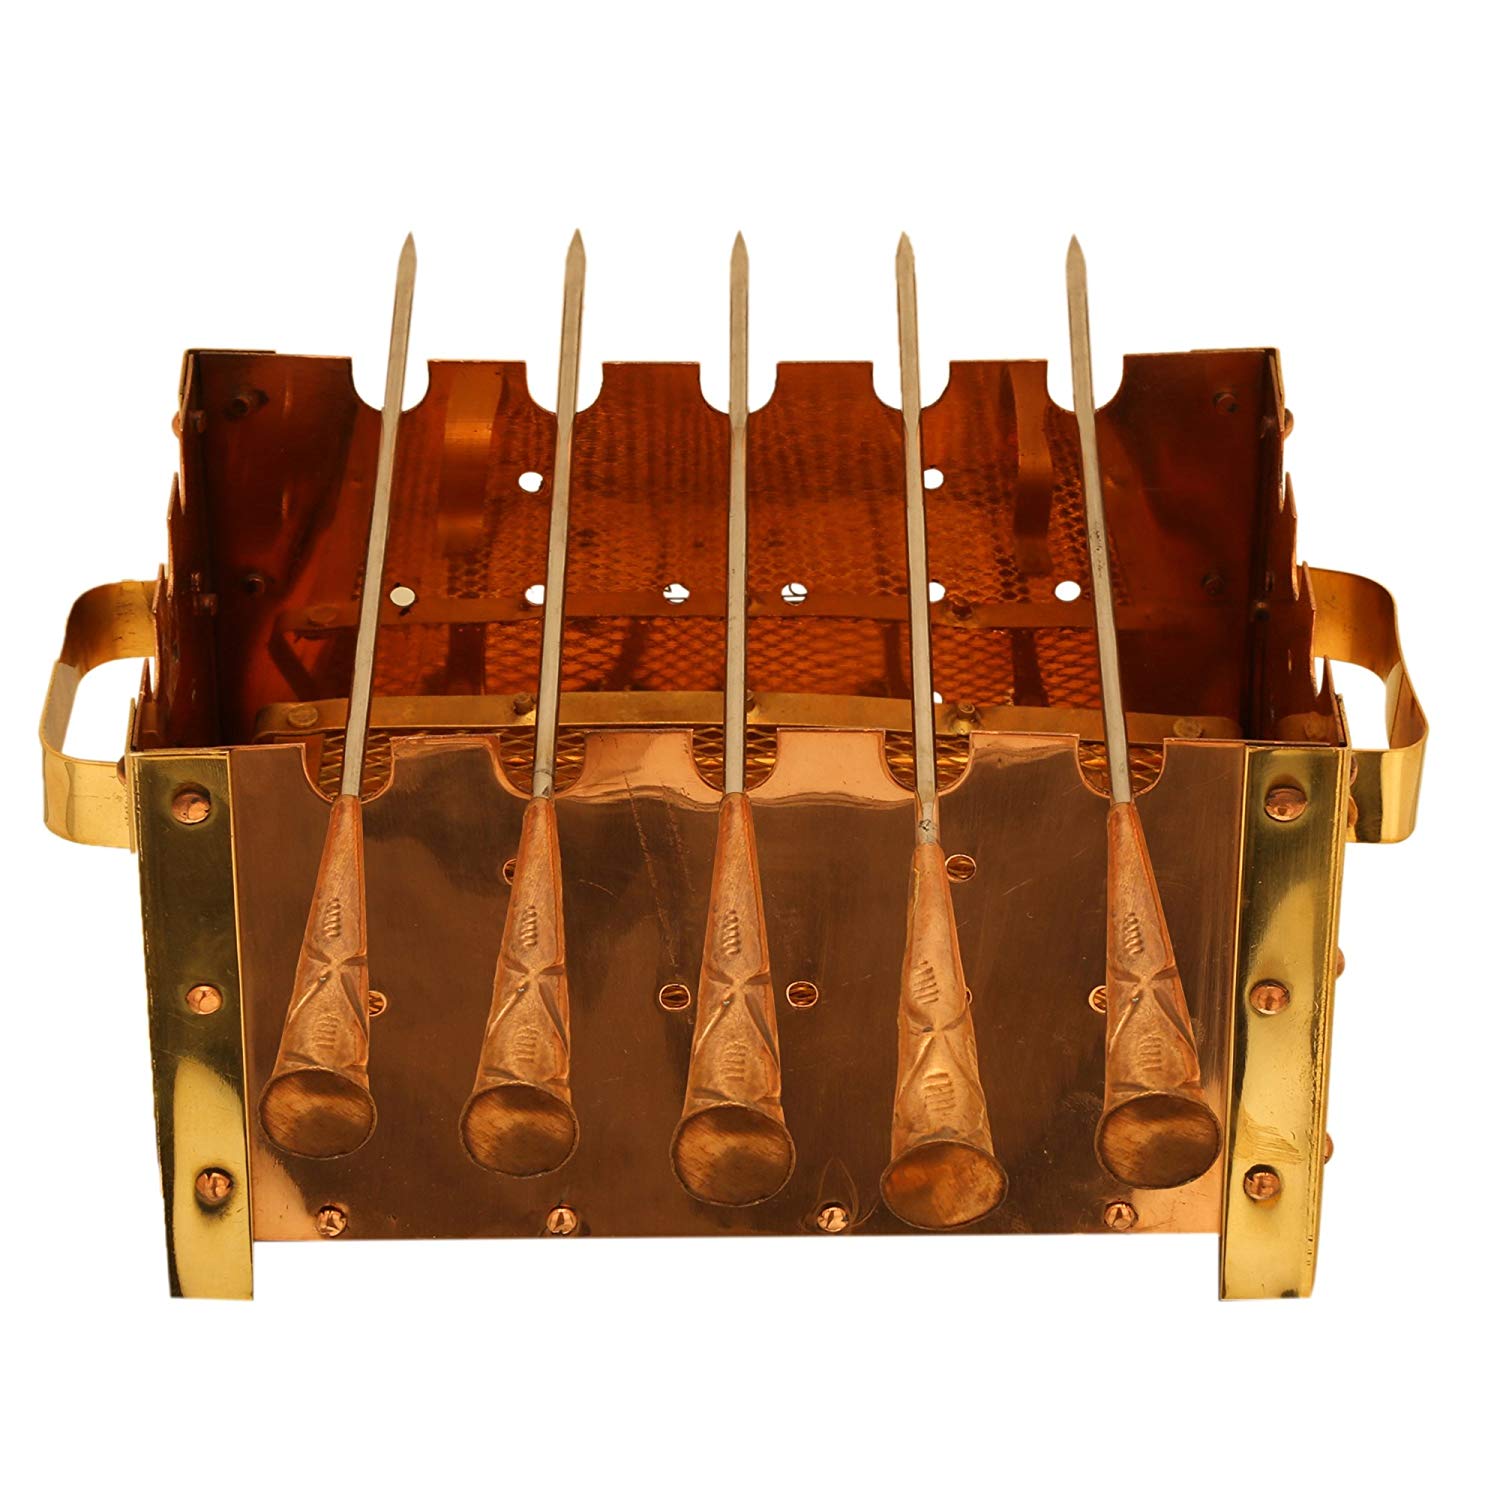 Pure Copper Paneer Tikka Rectangular Barbecue Grille With 5 Skewers | For Paneer Chicken Tikka Dish Garden Outdoor Picnic Use. (10" x 5" Inches)